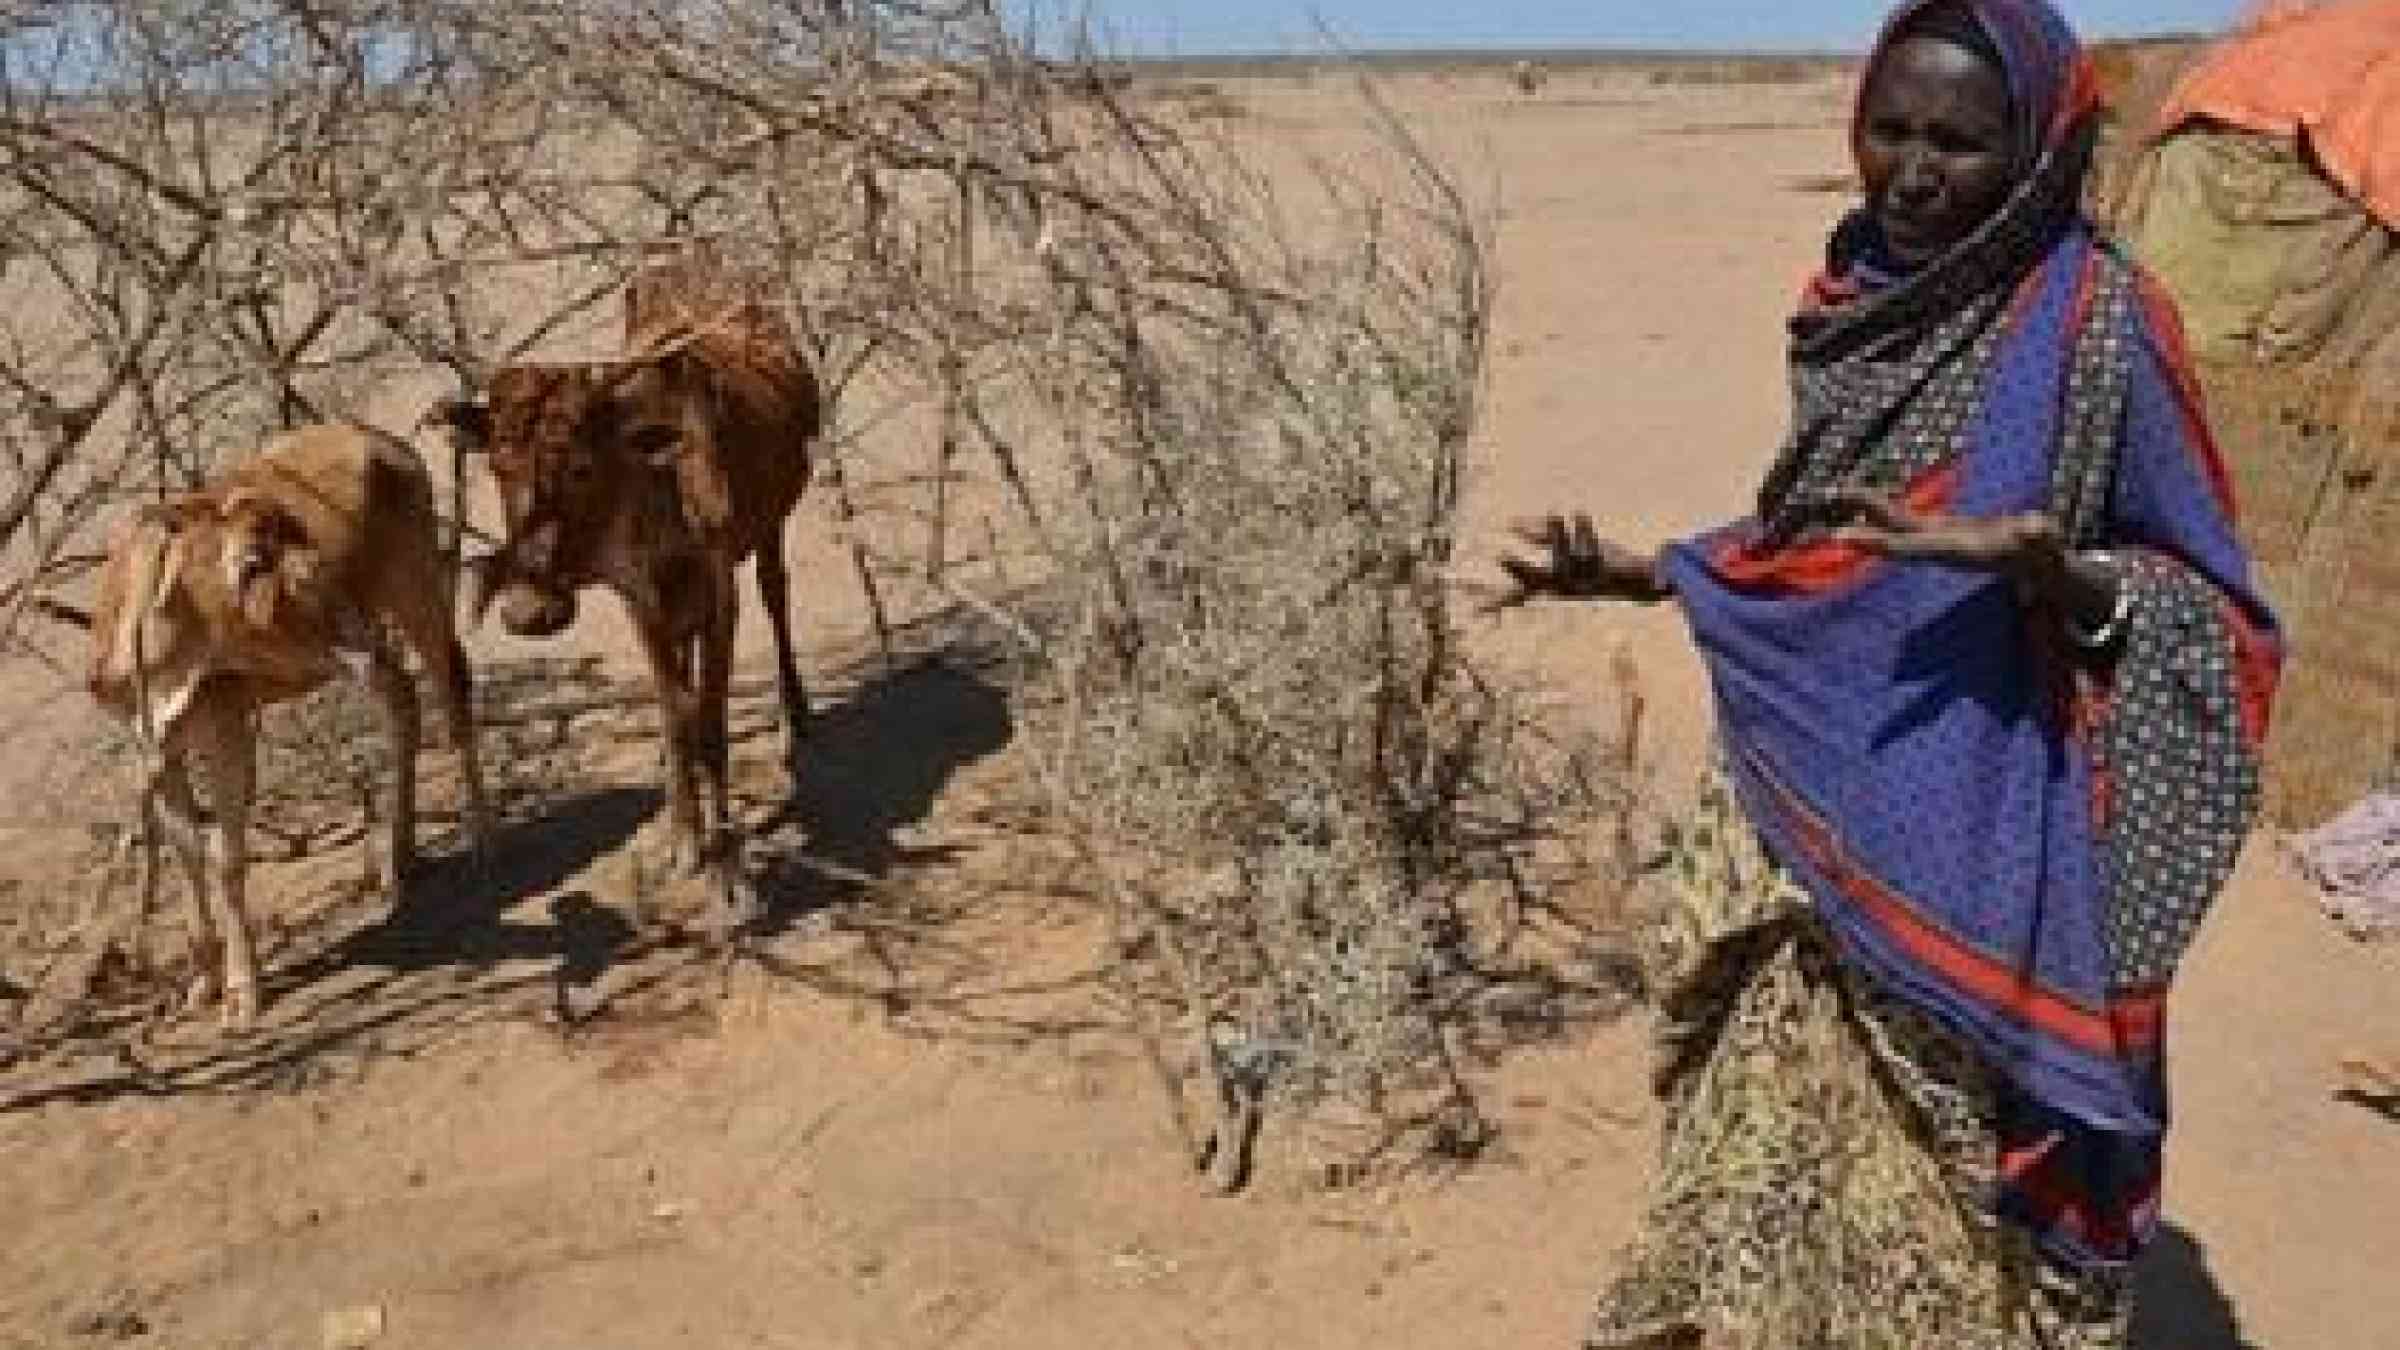 Drought in Ethiopia has led to successive failed harvests and widespread livestock deaths in some areas (Photo: WFP/Melese Awoke)